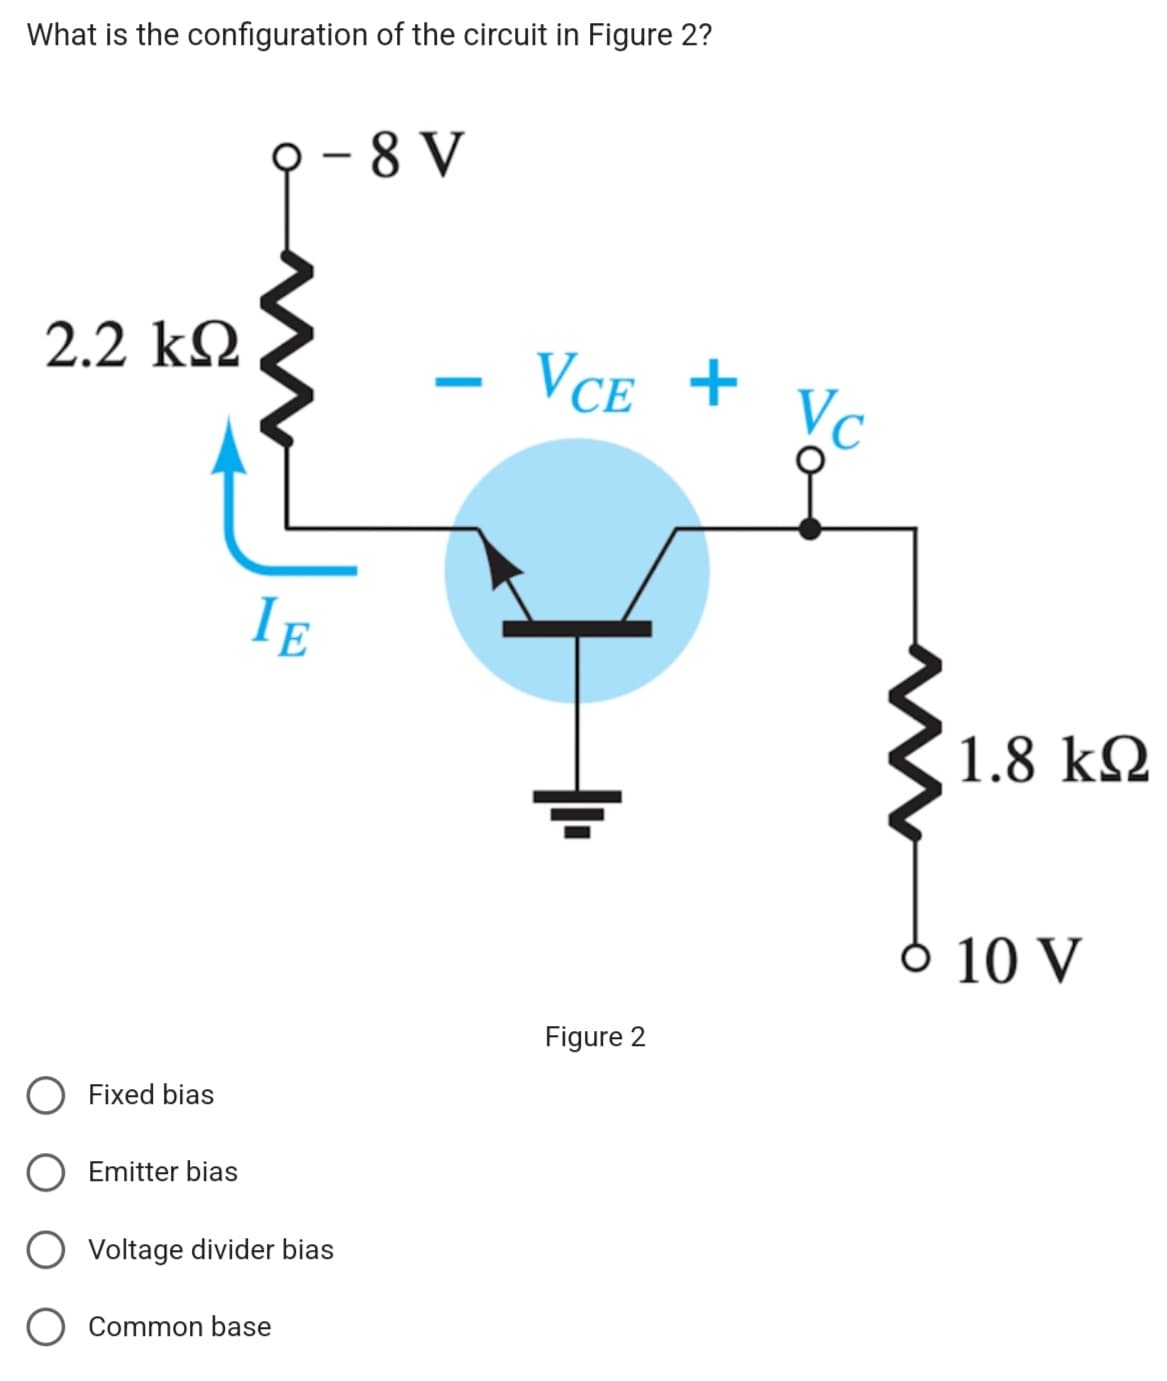 What is the configuration of the circuit in Figure 2?
2.2 ΚΩ
Fixed bias
Emitter bias
IE
-
Voltage divider bias
O Common base
-8 V
-
- VCE +
Figure 2
Vc
1.8 ΚΩ
10 V